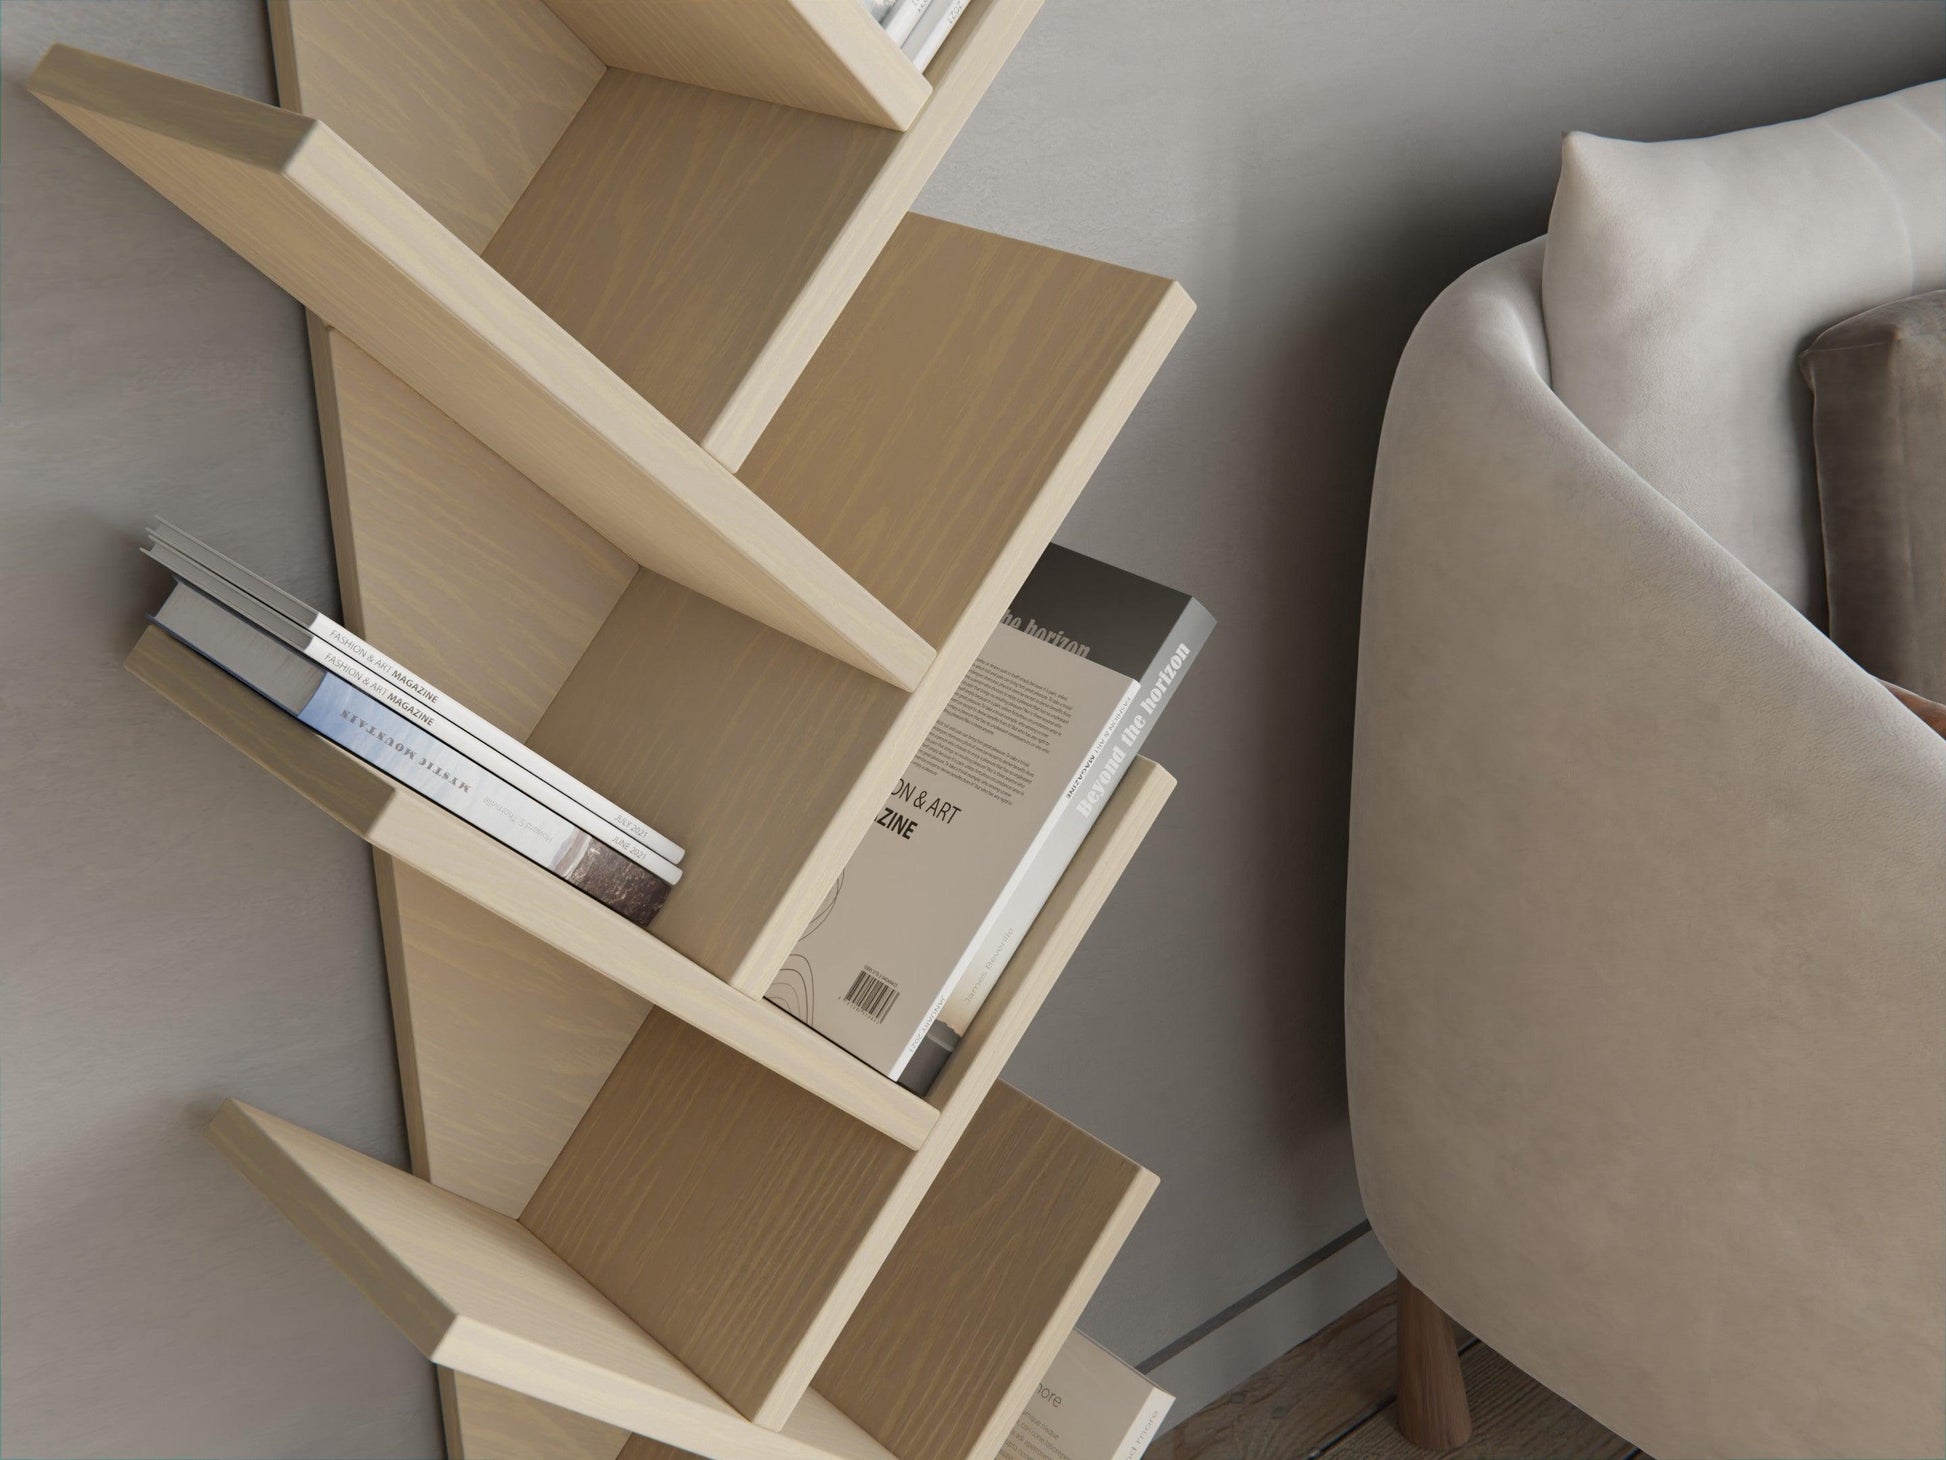 Upgrade to our ply bookshelf for children's rooms. A simple, stylish, and space-saving book organisation solution.